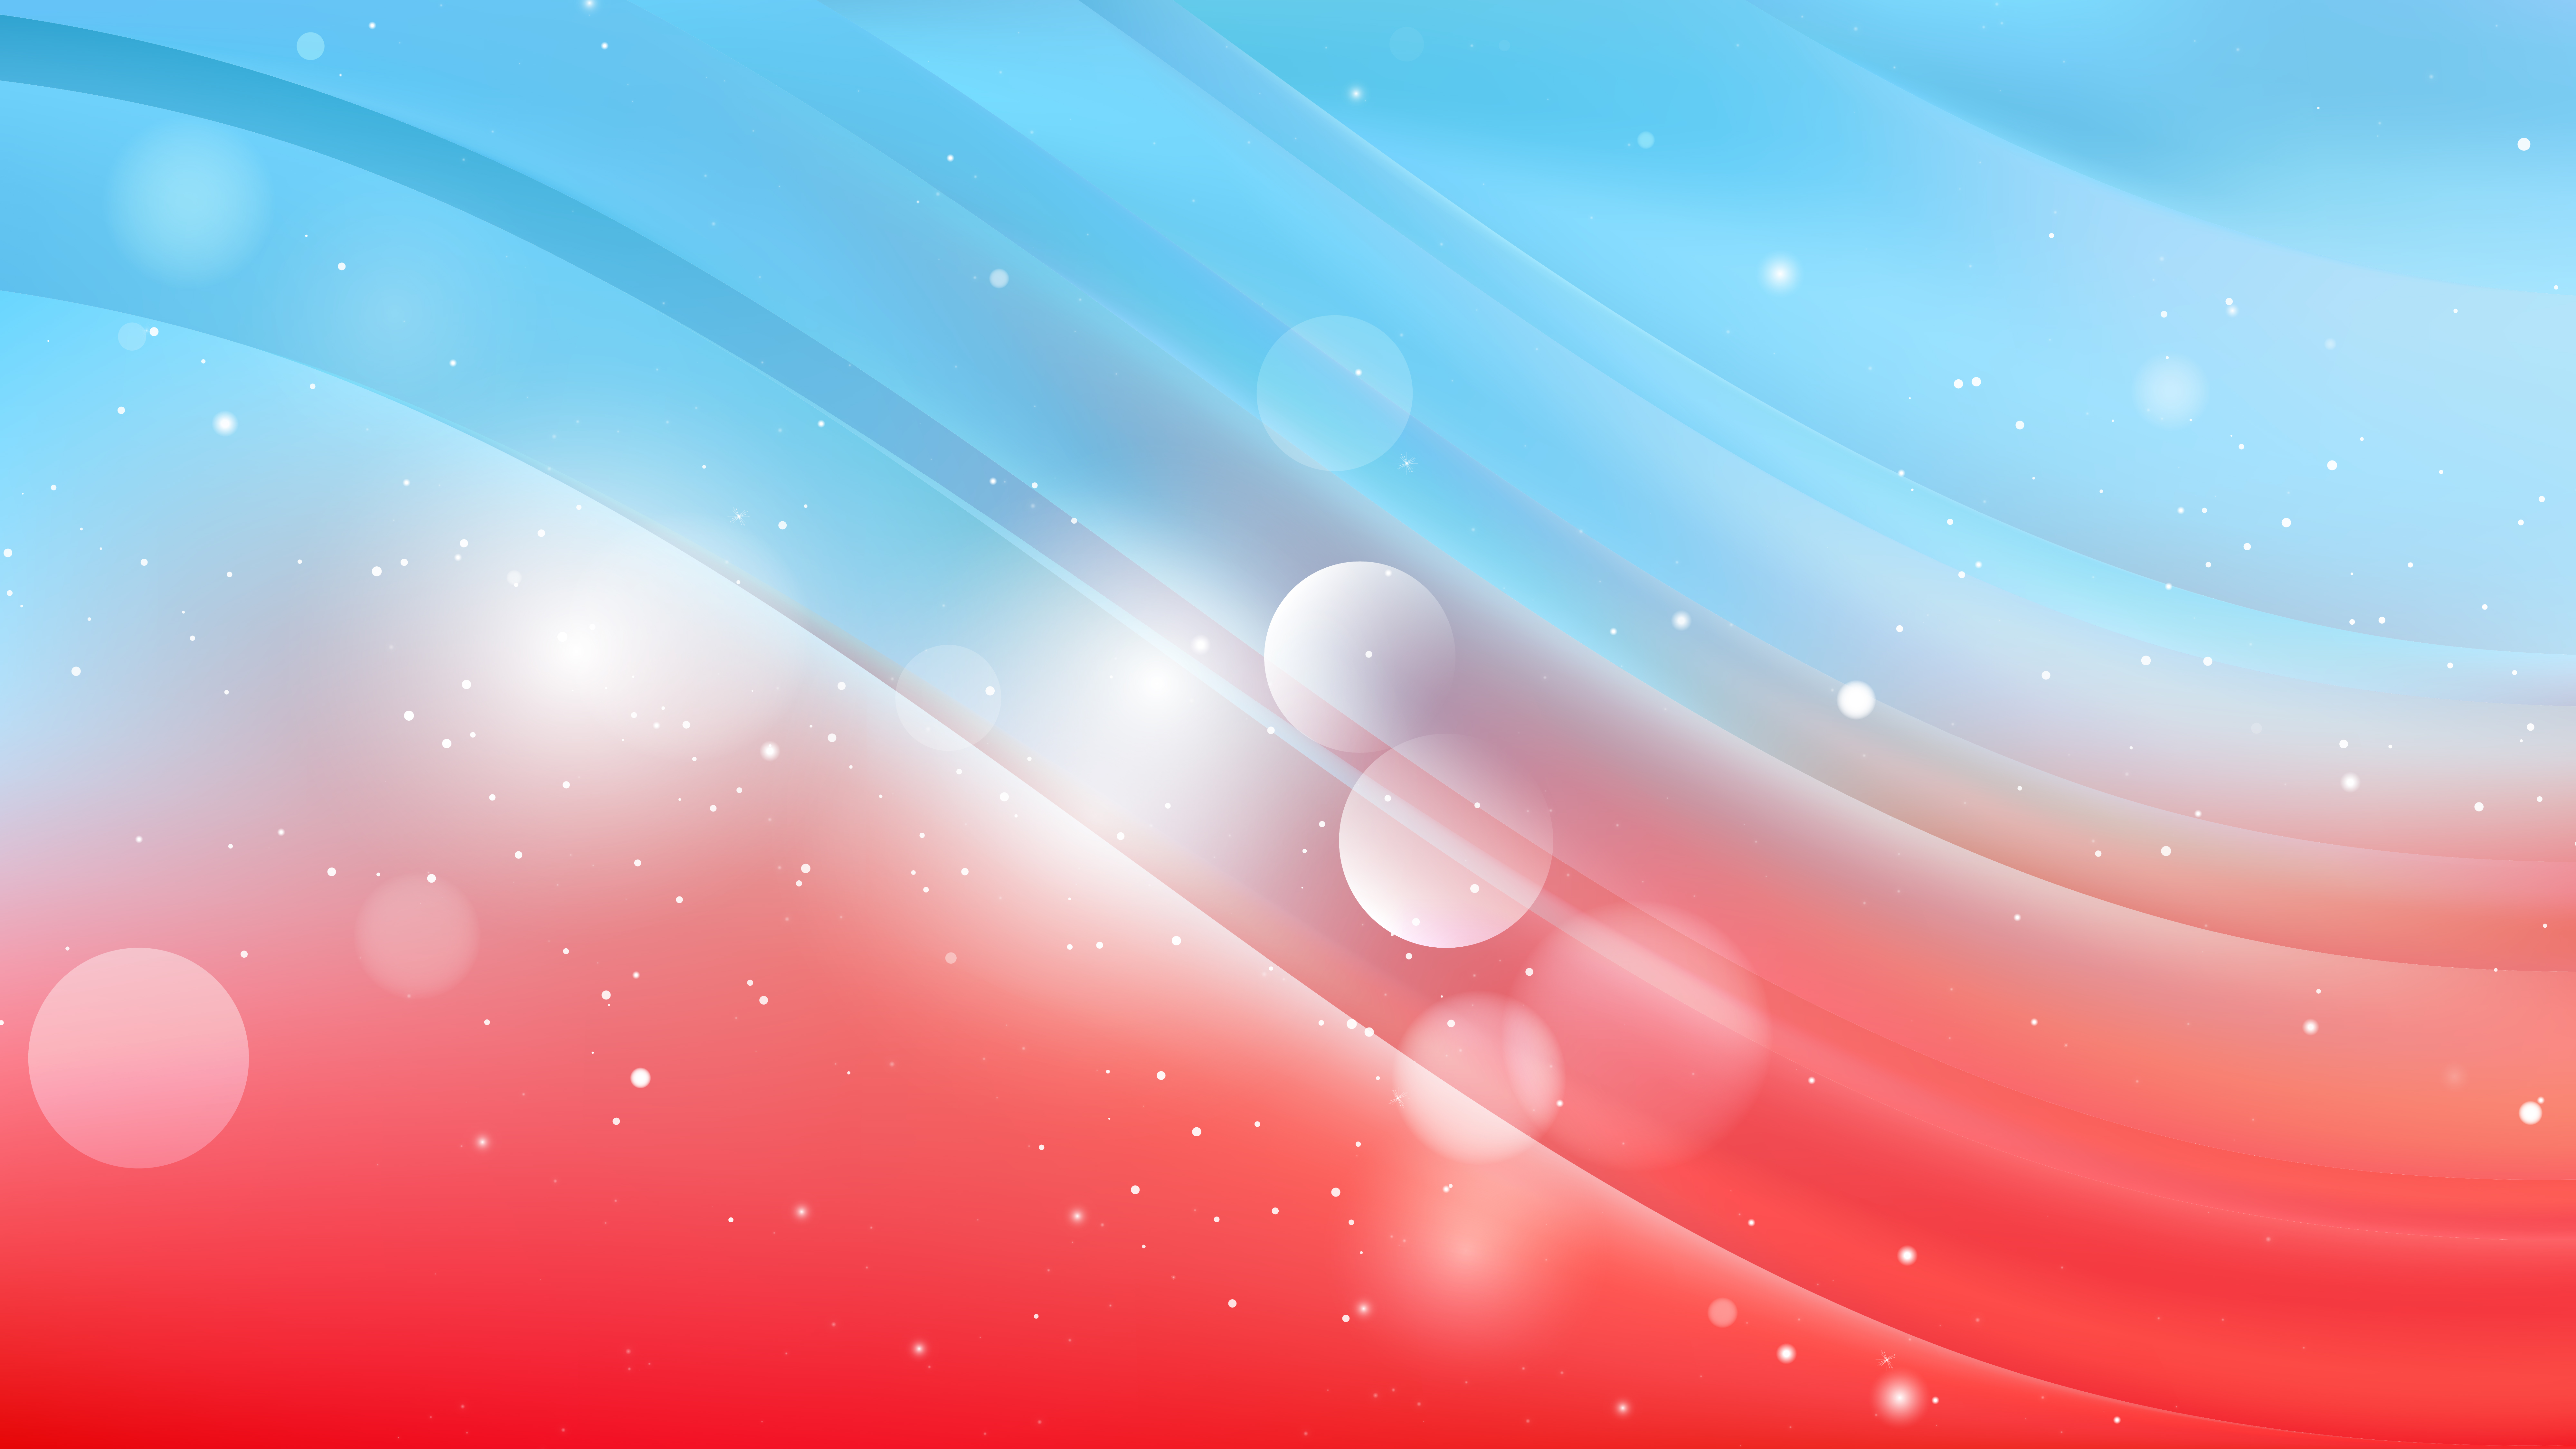 red and blue abstract backgrounds